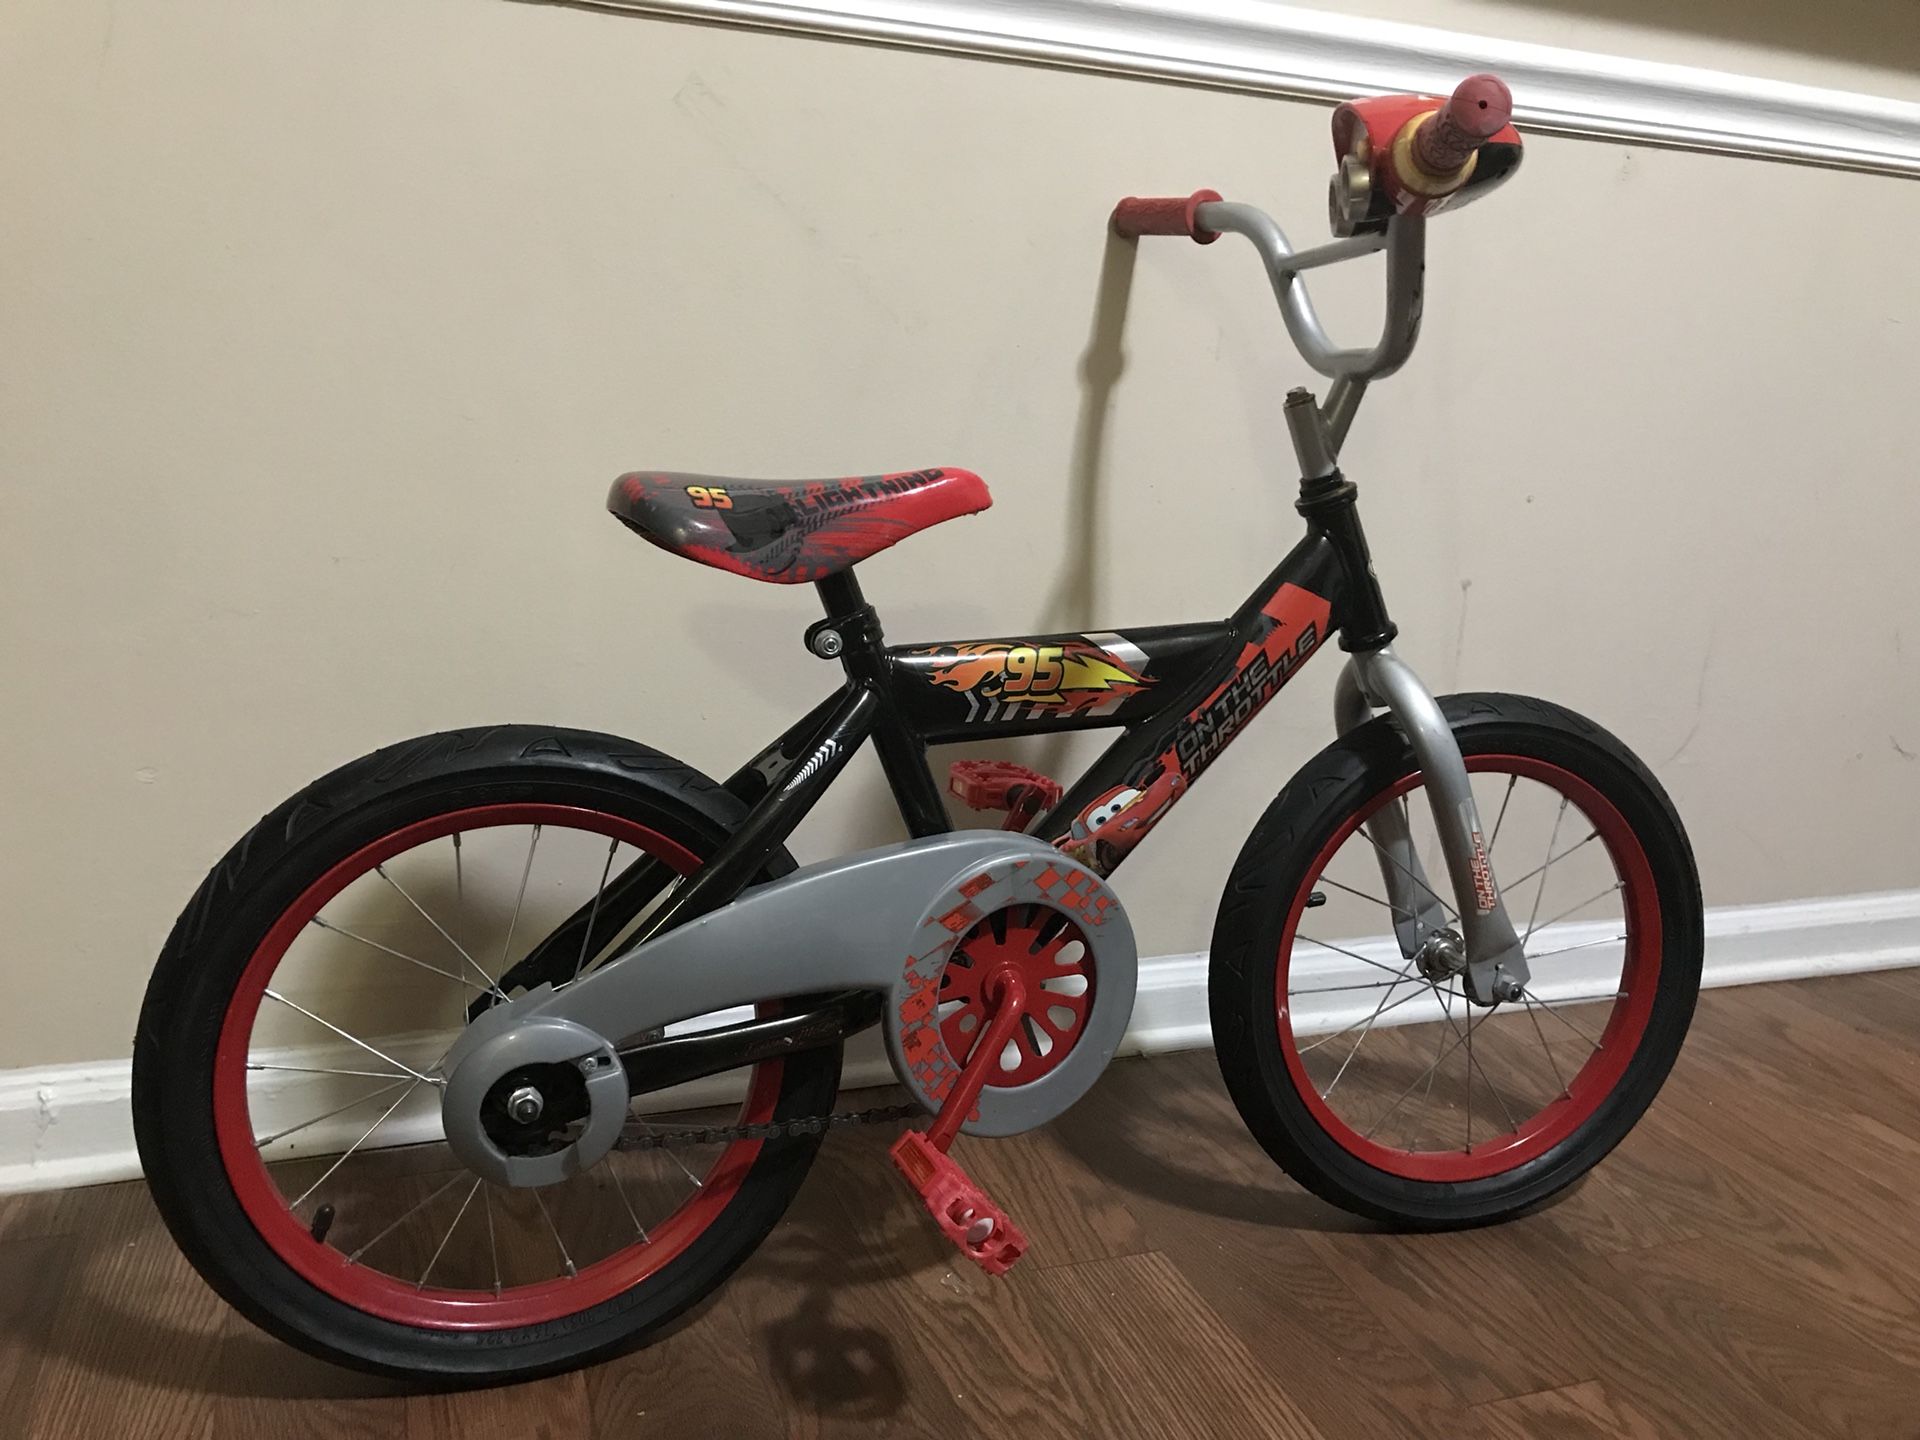 Disney Pixar Lightning McQueen 12” Boys Red Bike with Sounds by Huffy